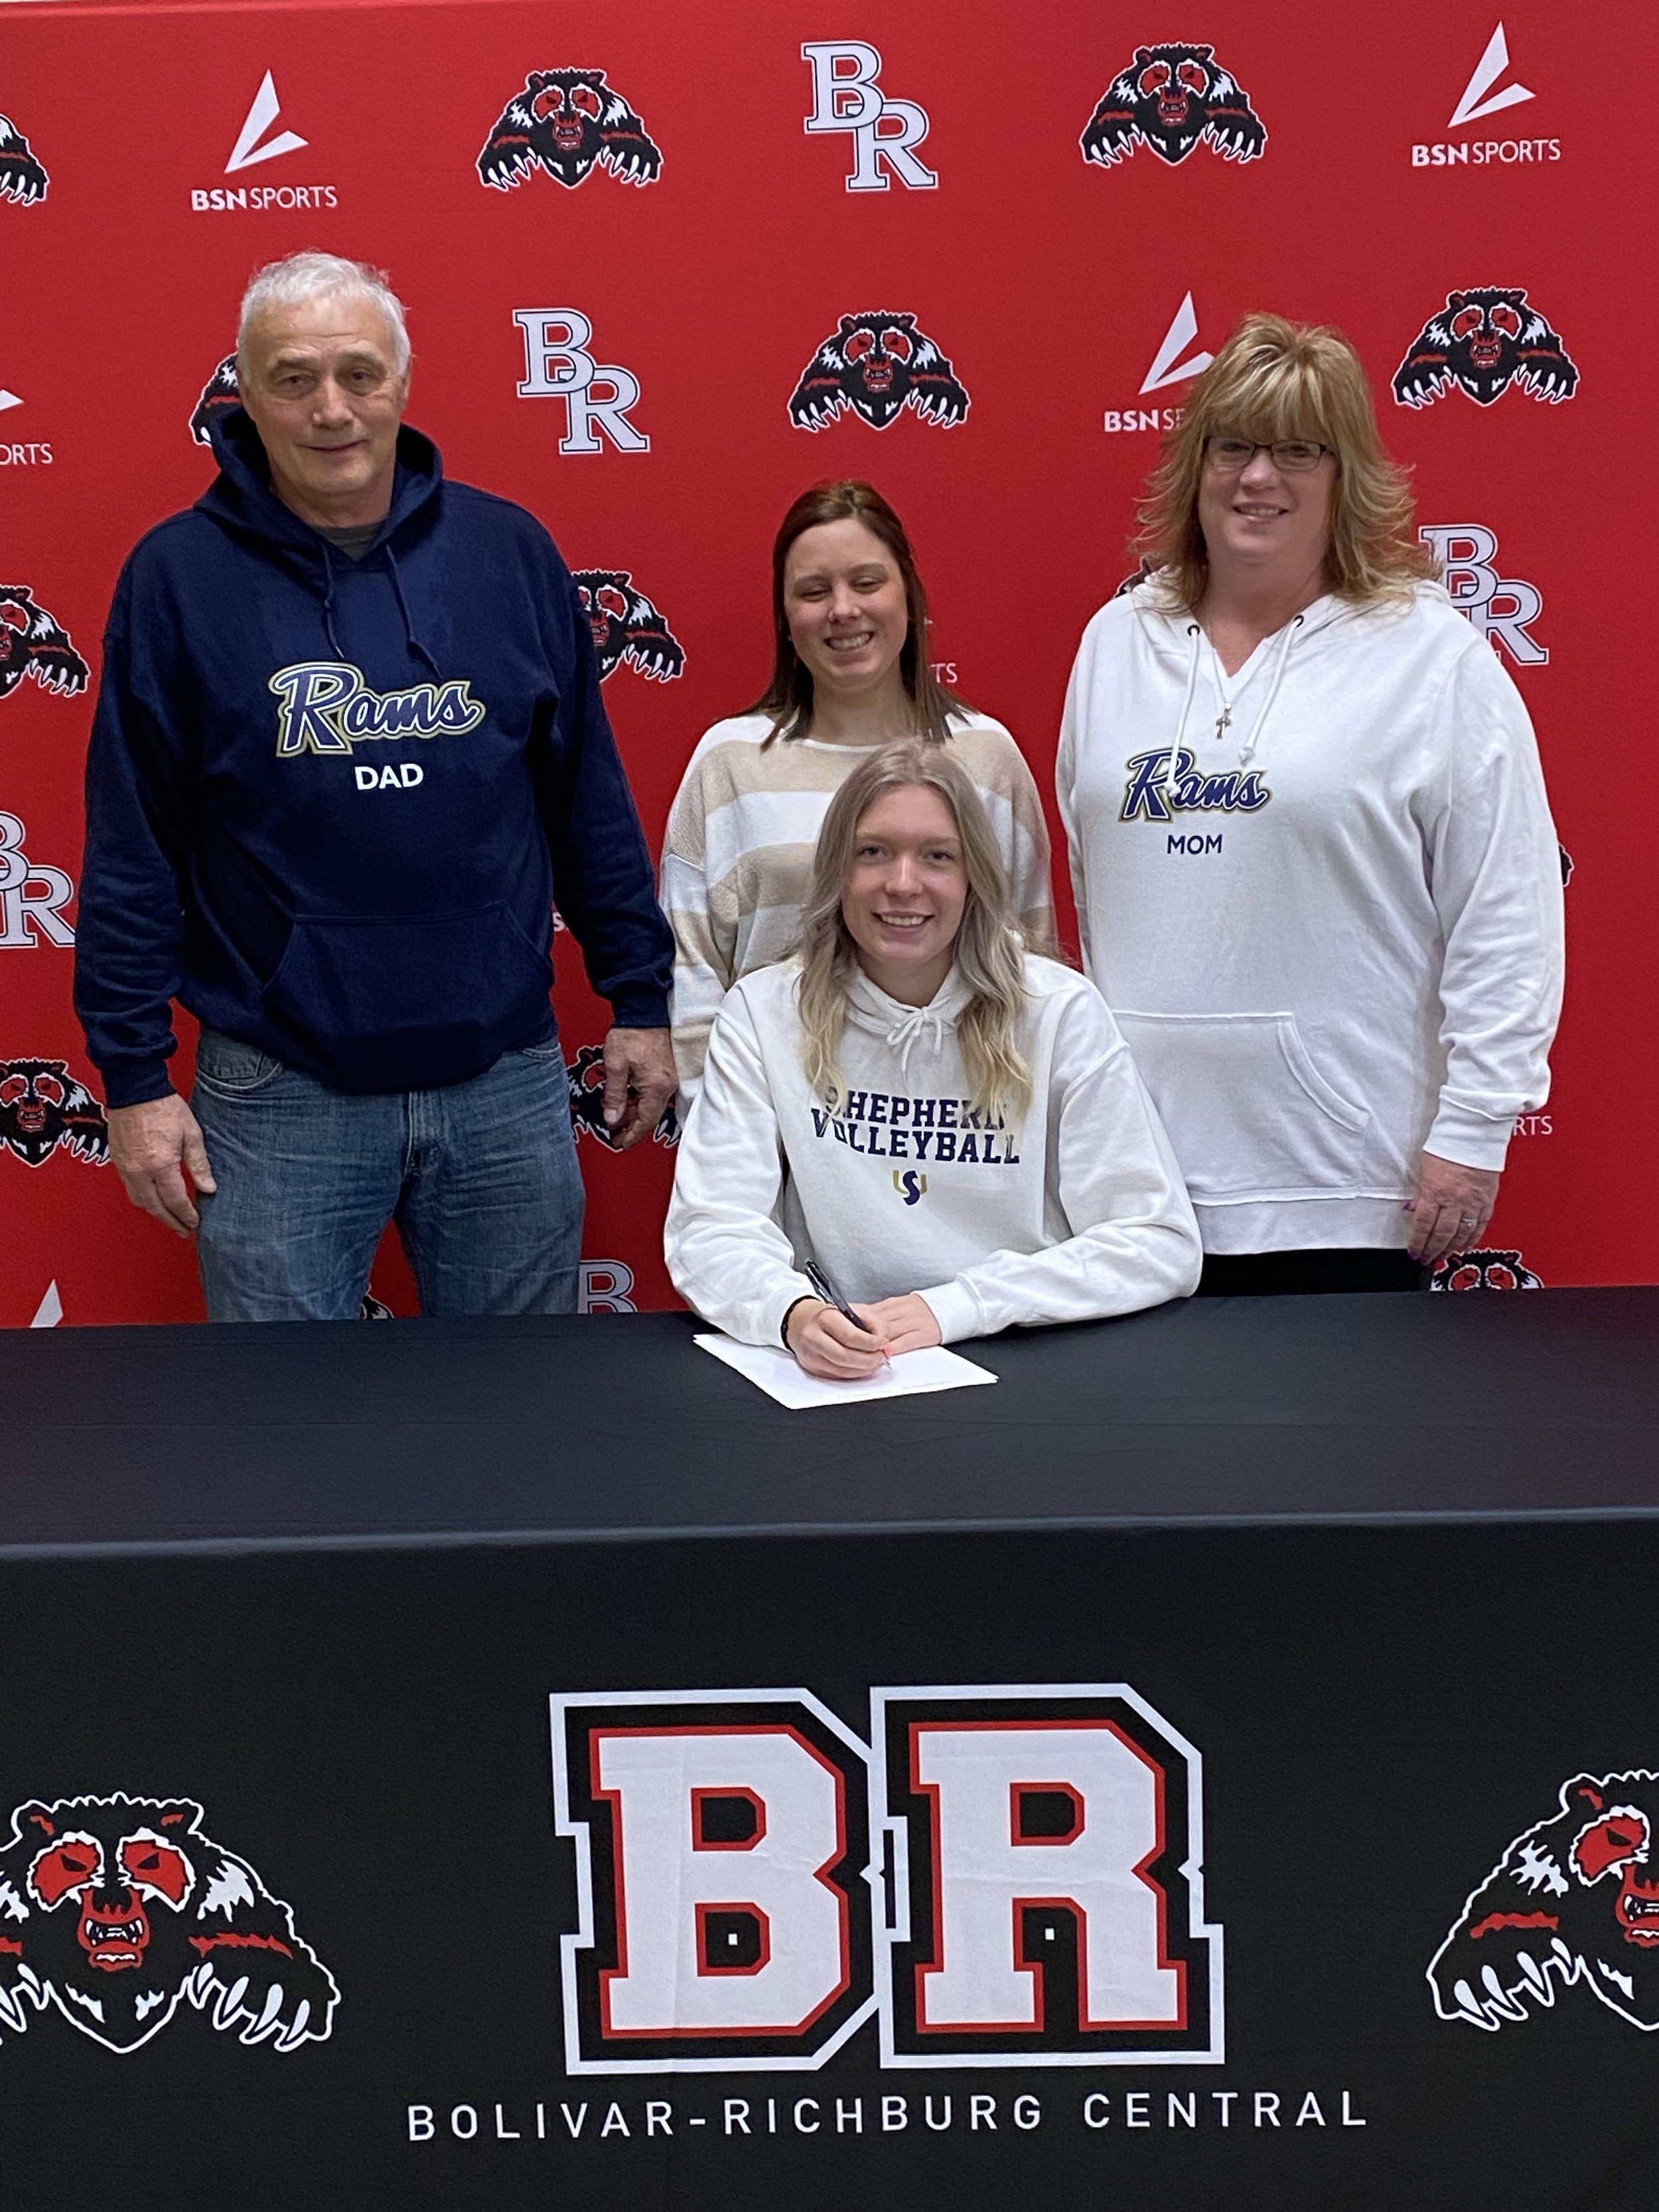  Bolivar-Richburg’s Senior volleyball standout, Jianna Scott, middle, officially signed the dotted line to continue furthering her educational and playing career after high school by committing to Division II’s Shepherd University in West Virginia. F